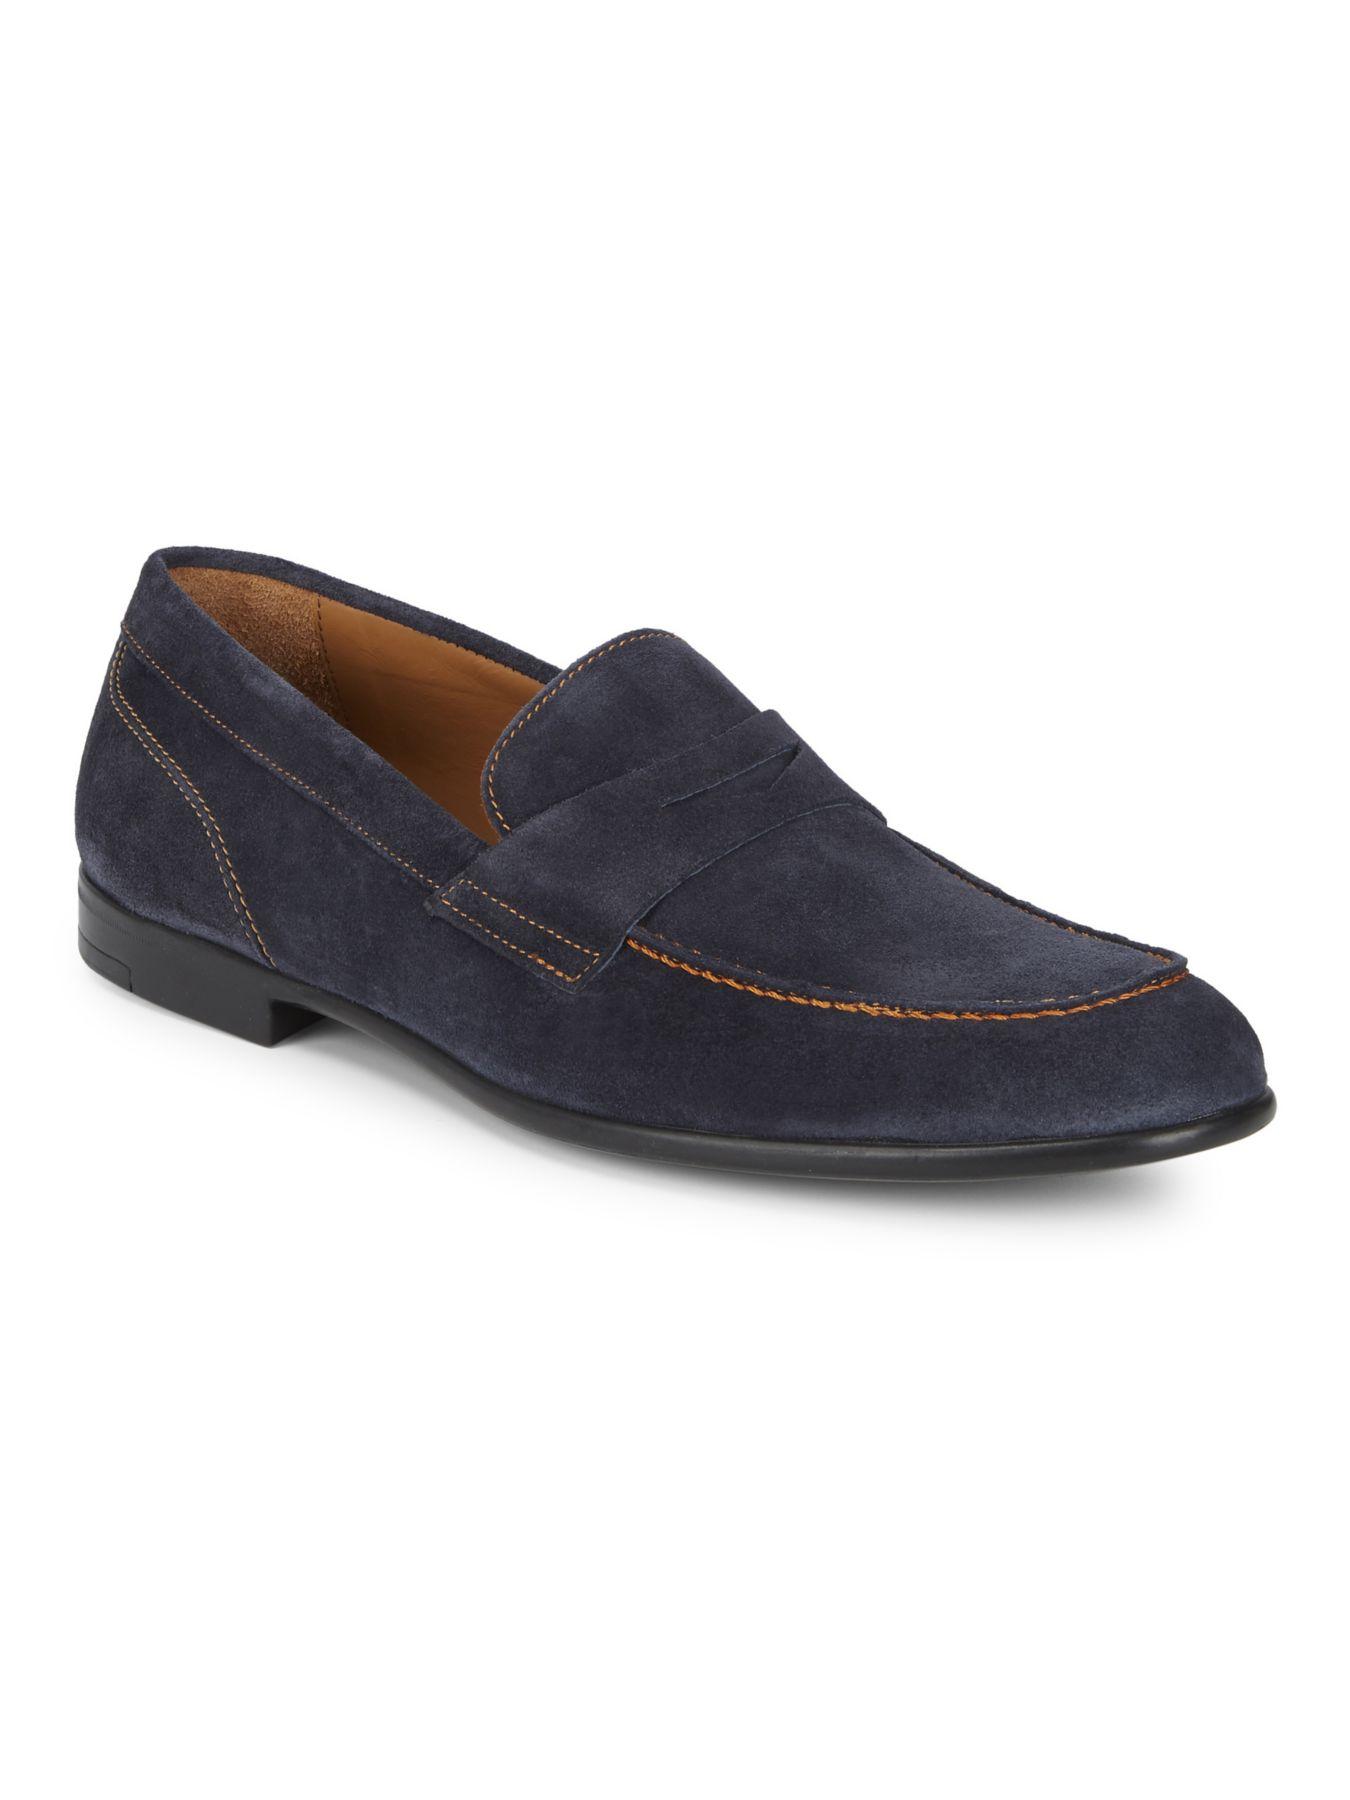 Bruno Magli Silas Suede Loafers in Navy (Blue) for Men - Lyst